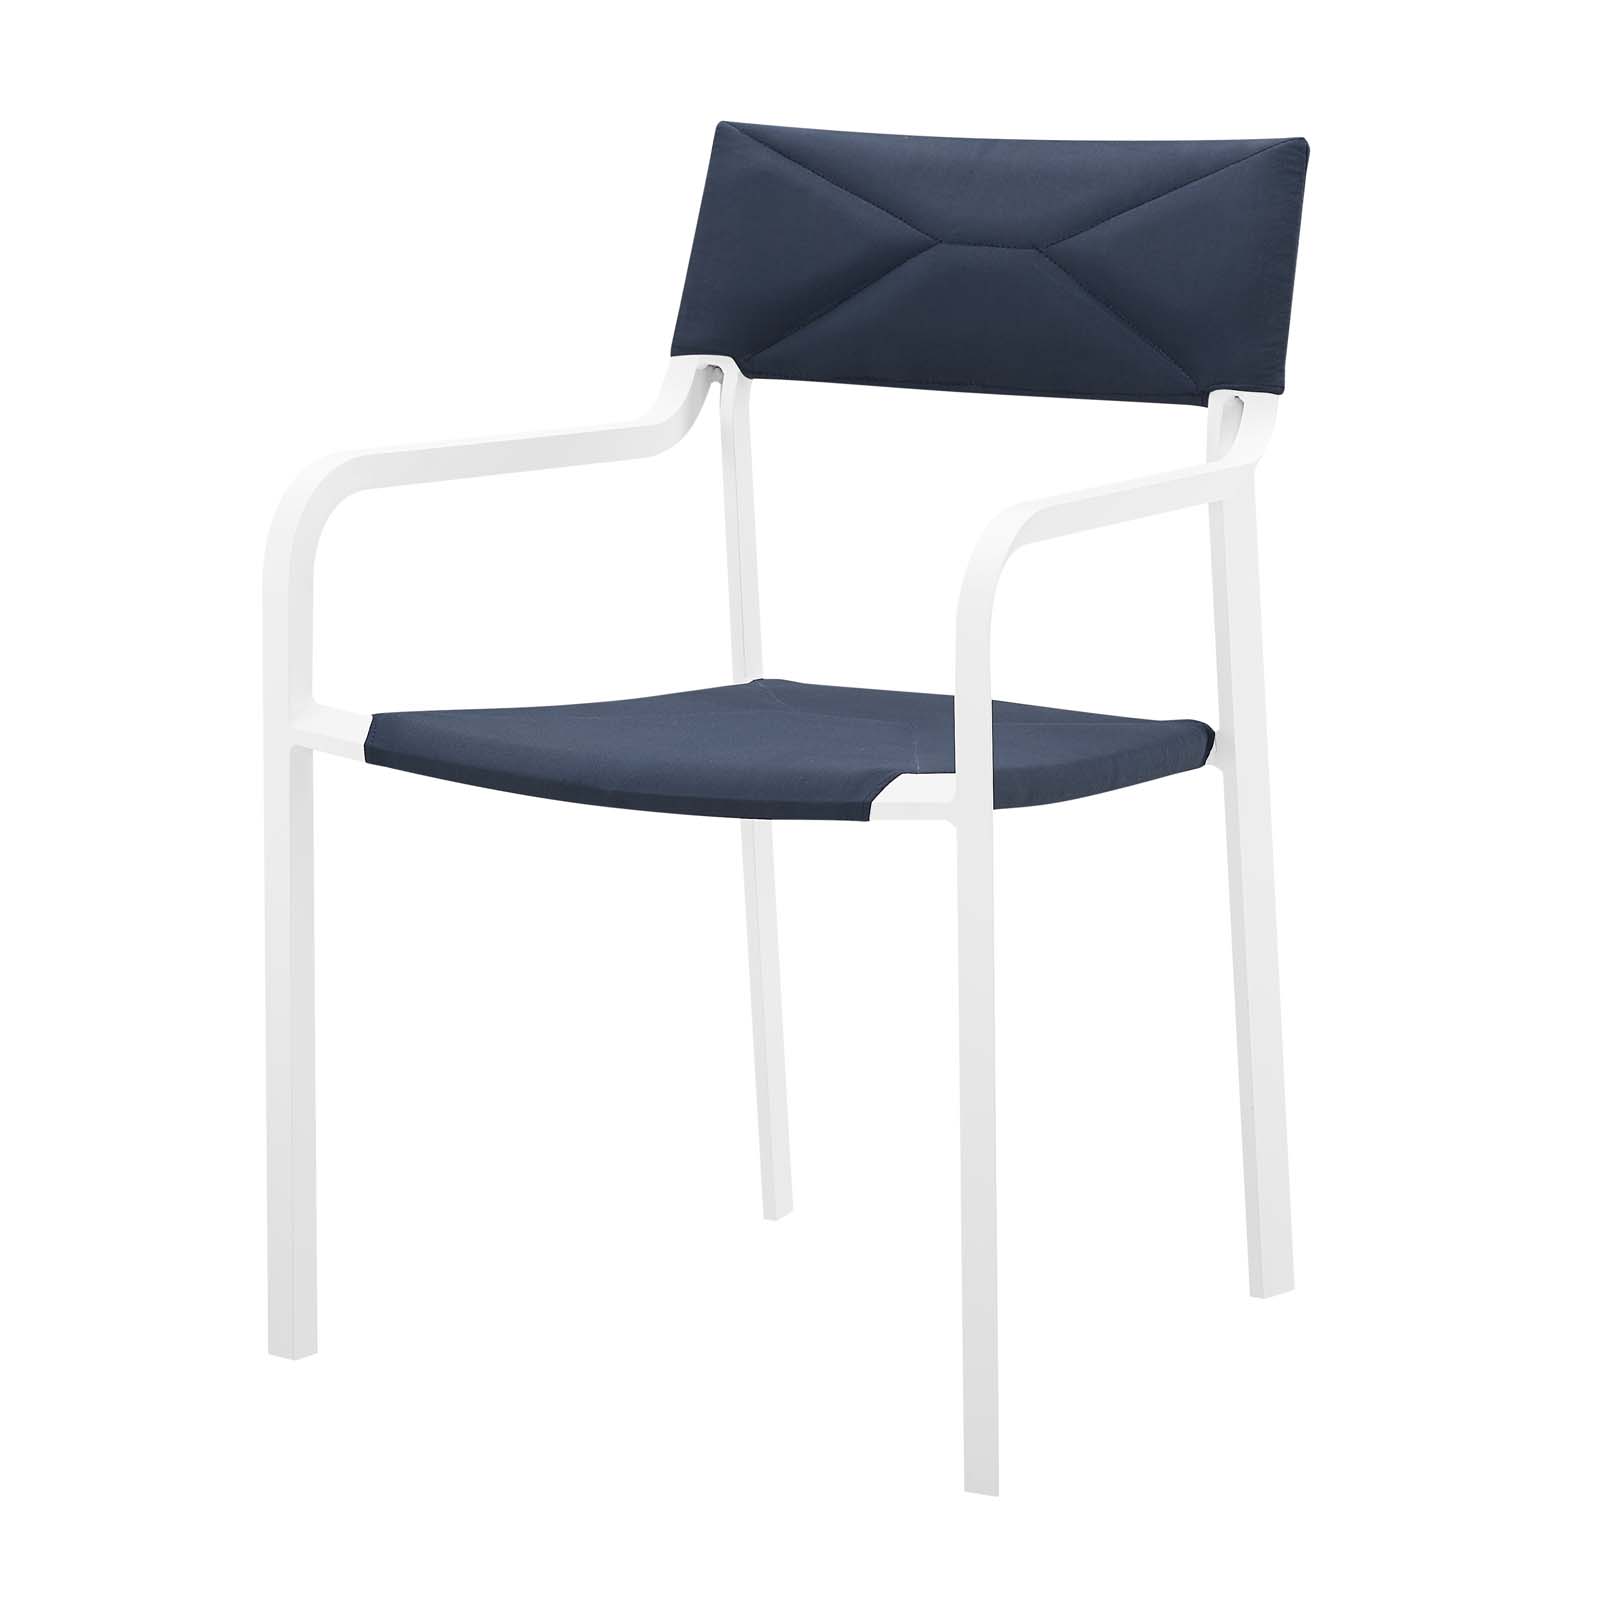 Contemporary Modern Urban Designer Outdoor Patio Balcony Garden Furniture Side Dining Armchair Chair, Fabric Aluminum, Navy Blue White - image 1 of 6